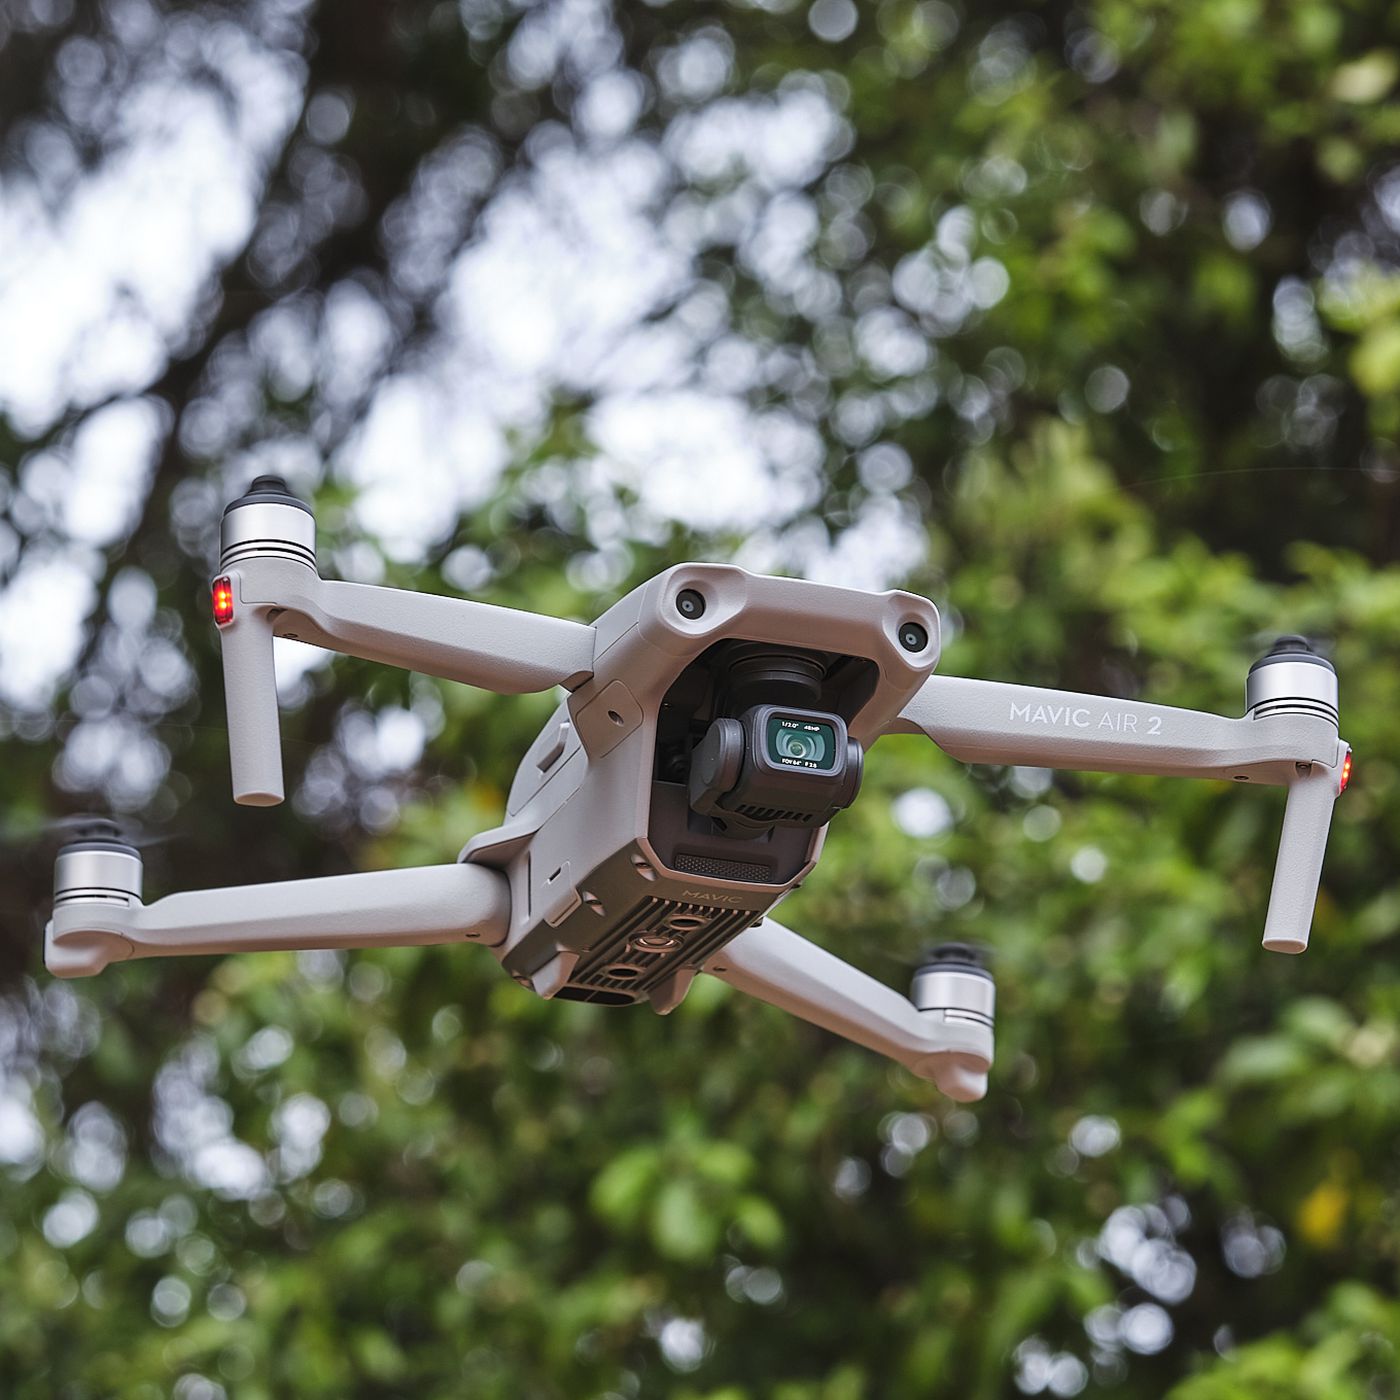 DJI Mavic Air 2 drone review: great photos without the Pro price